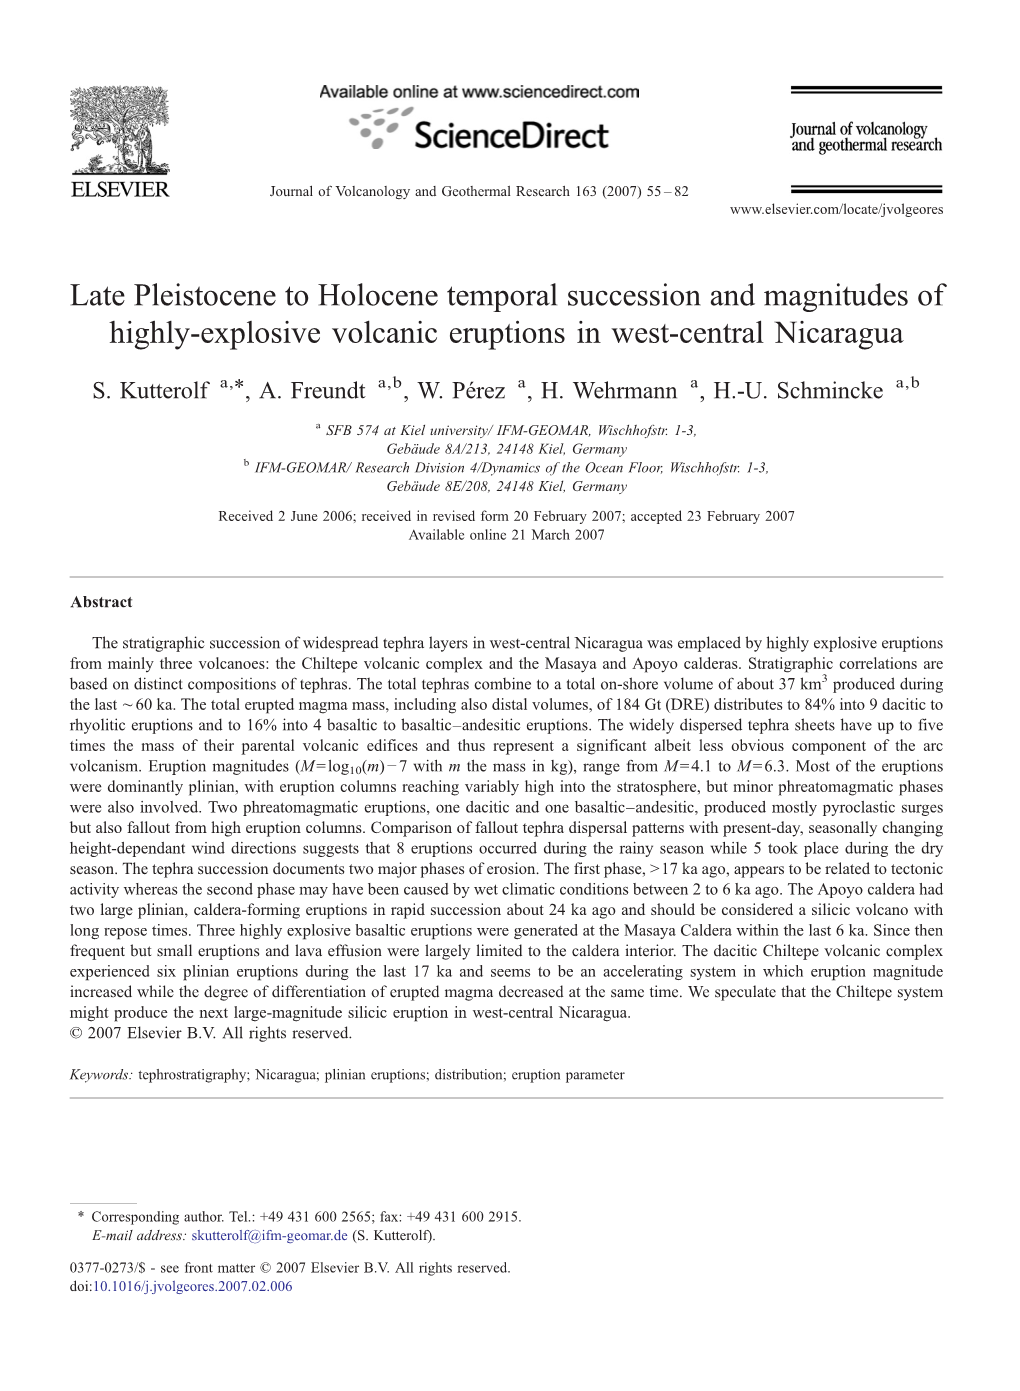 Late Pleistocene to Holocene Temporal Succession and Magnitudes of Highly-Explosive Volcanic Eruptions in West-Central Nicaragua ⁎ S